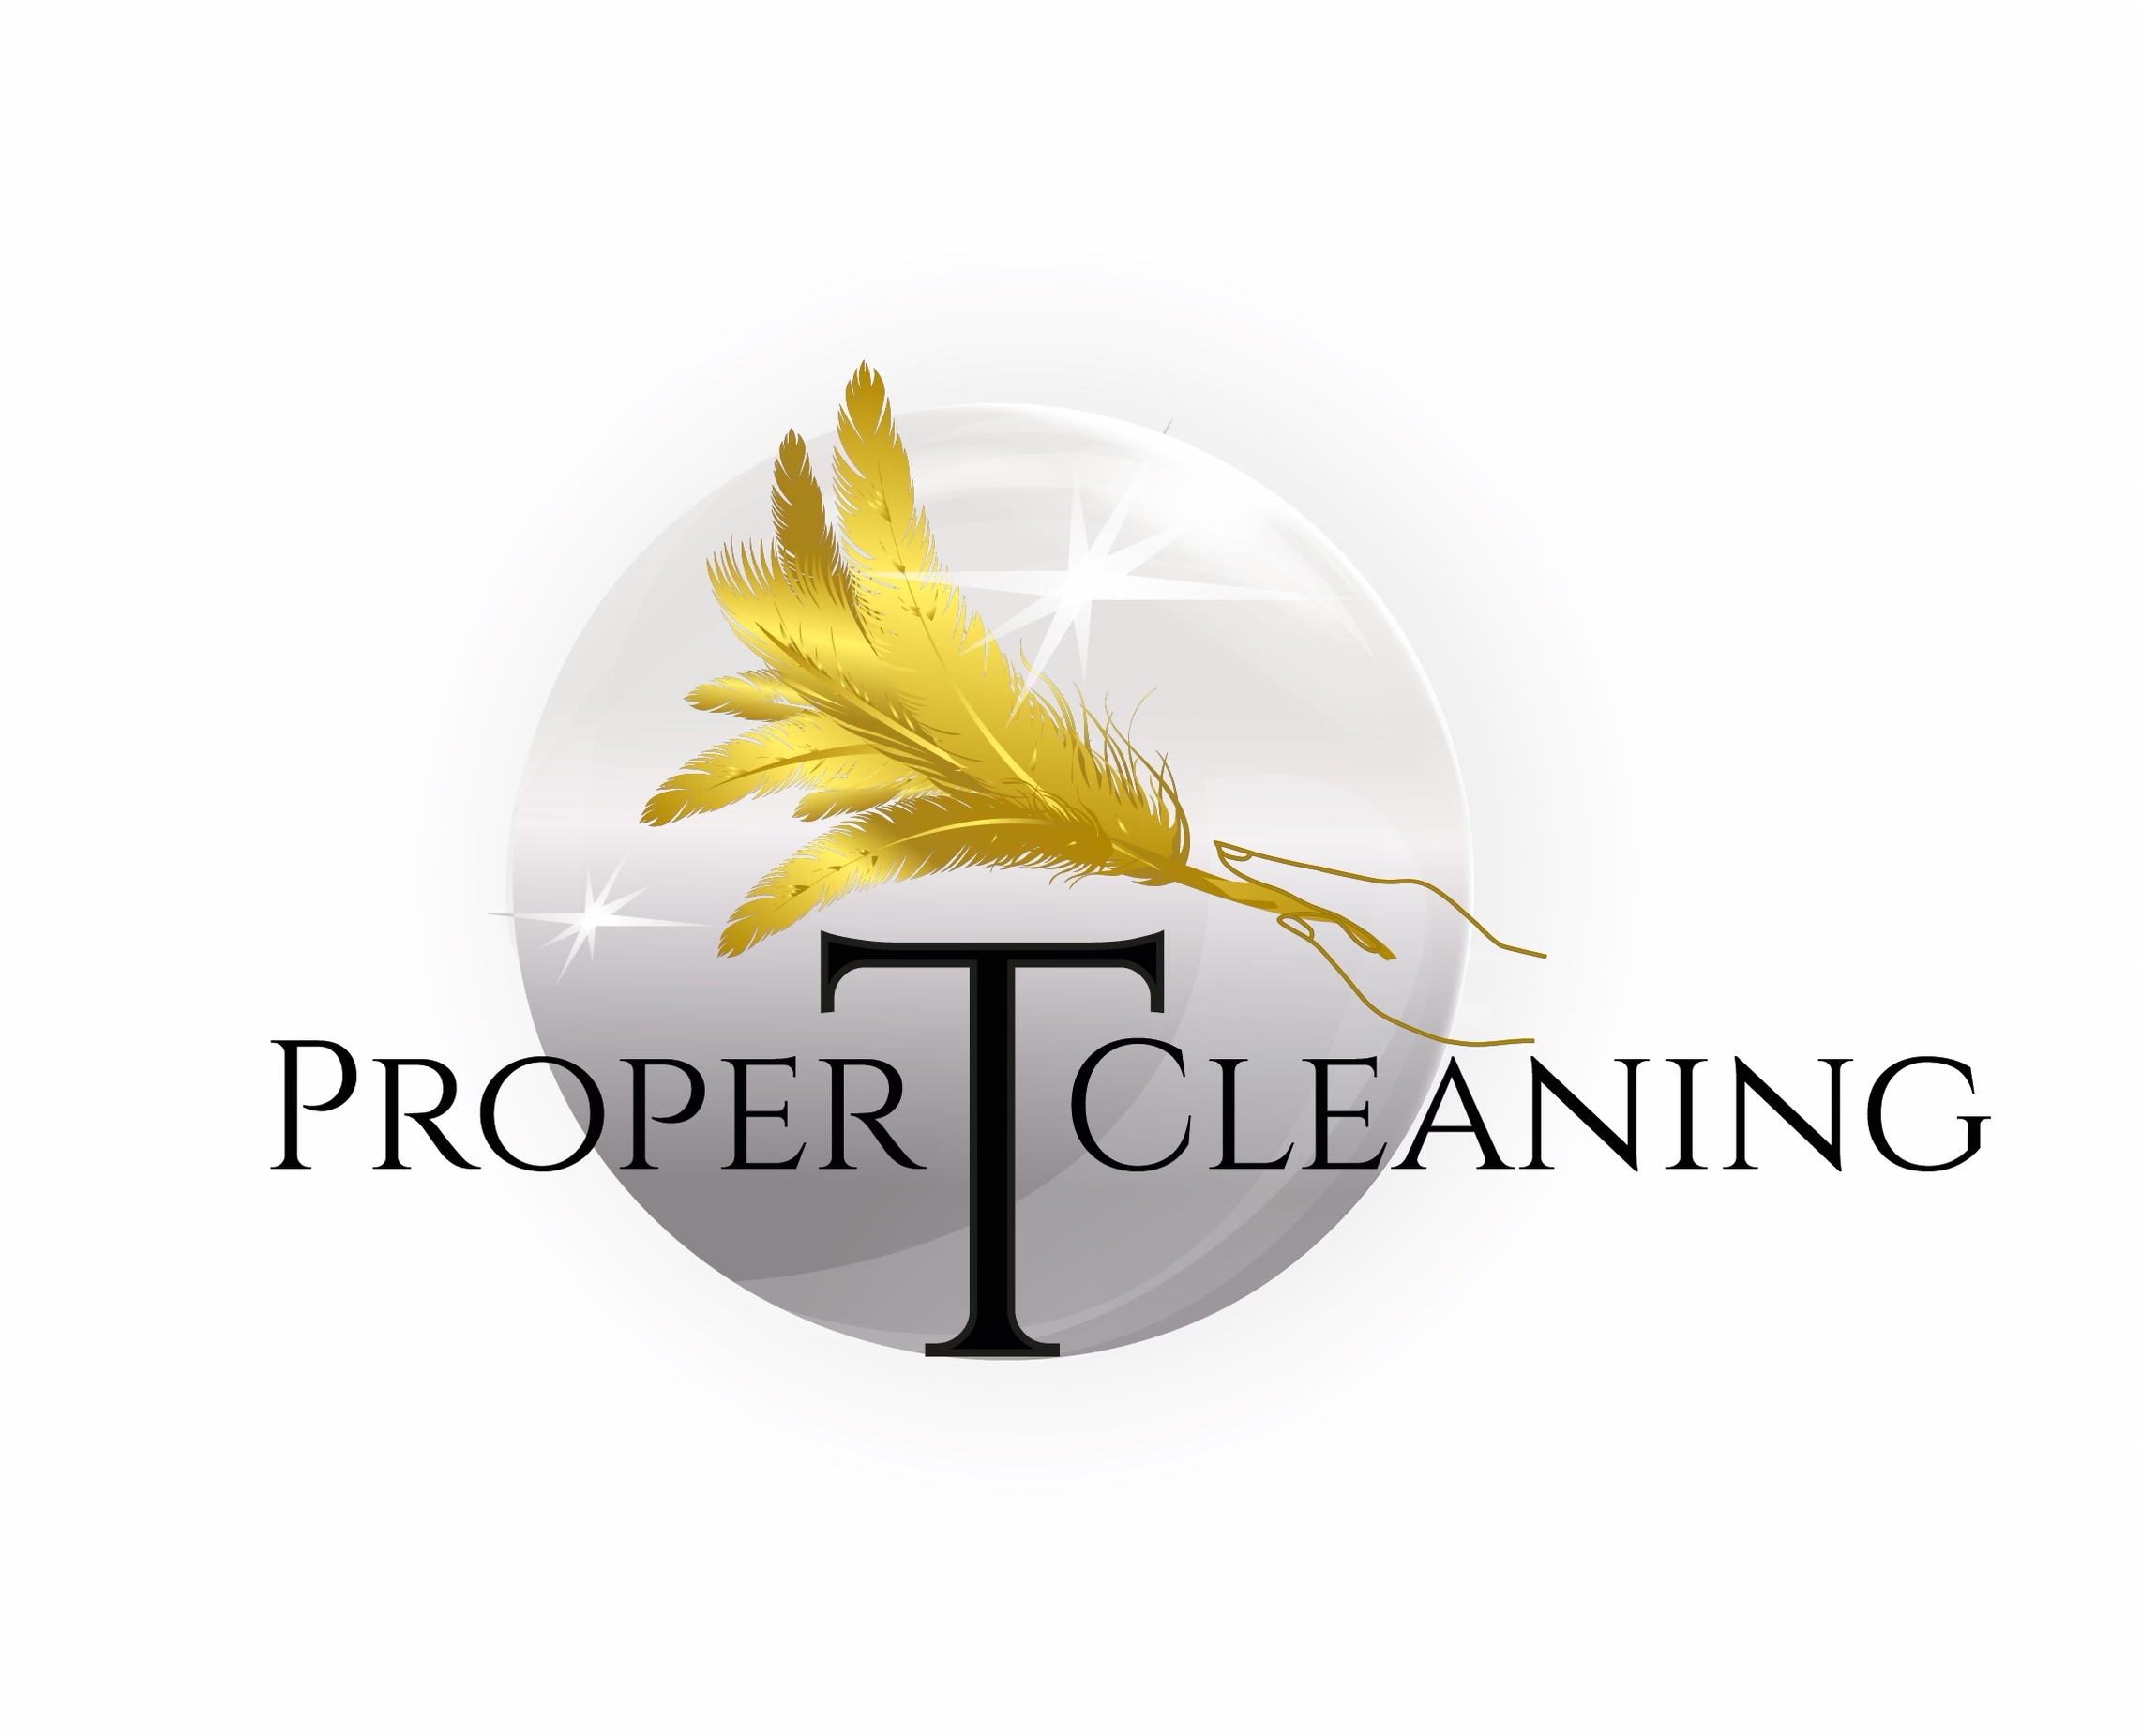 Proper T Cleaning Logo